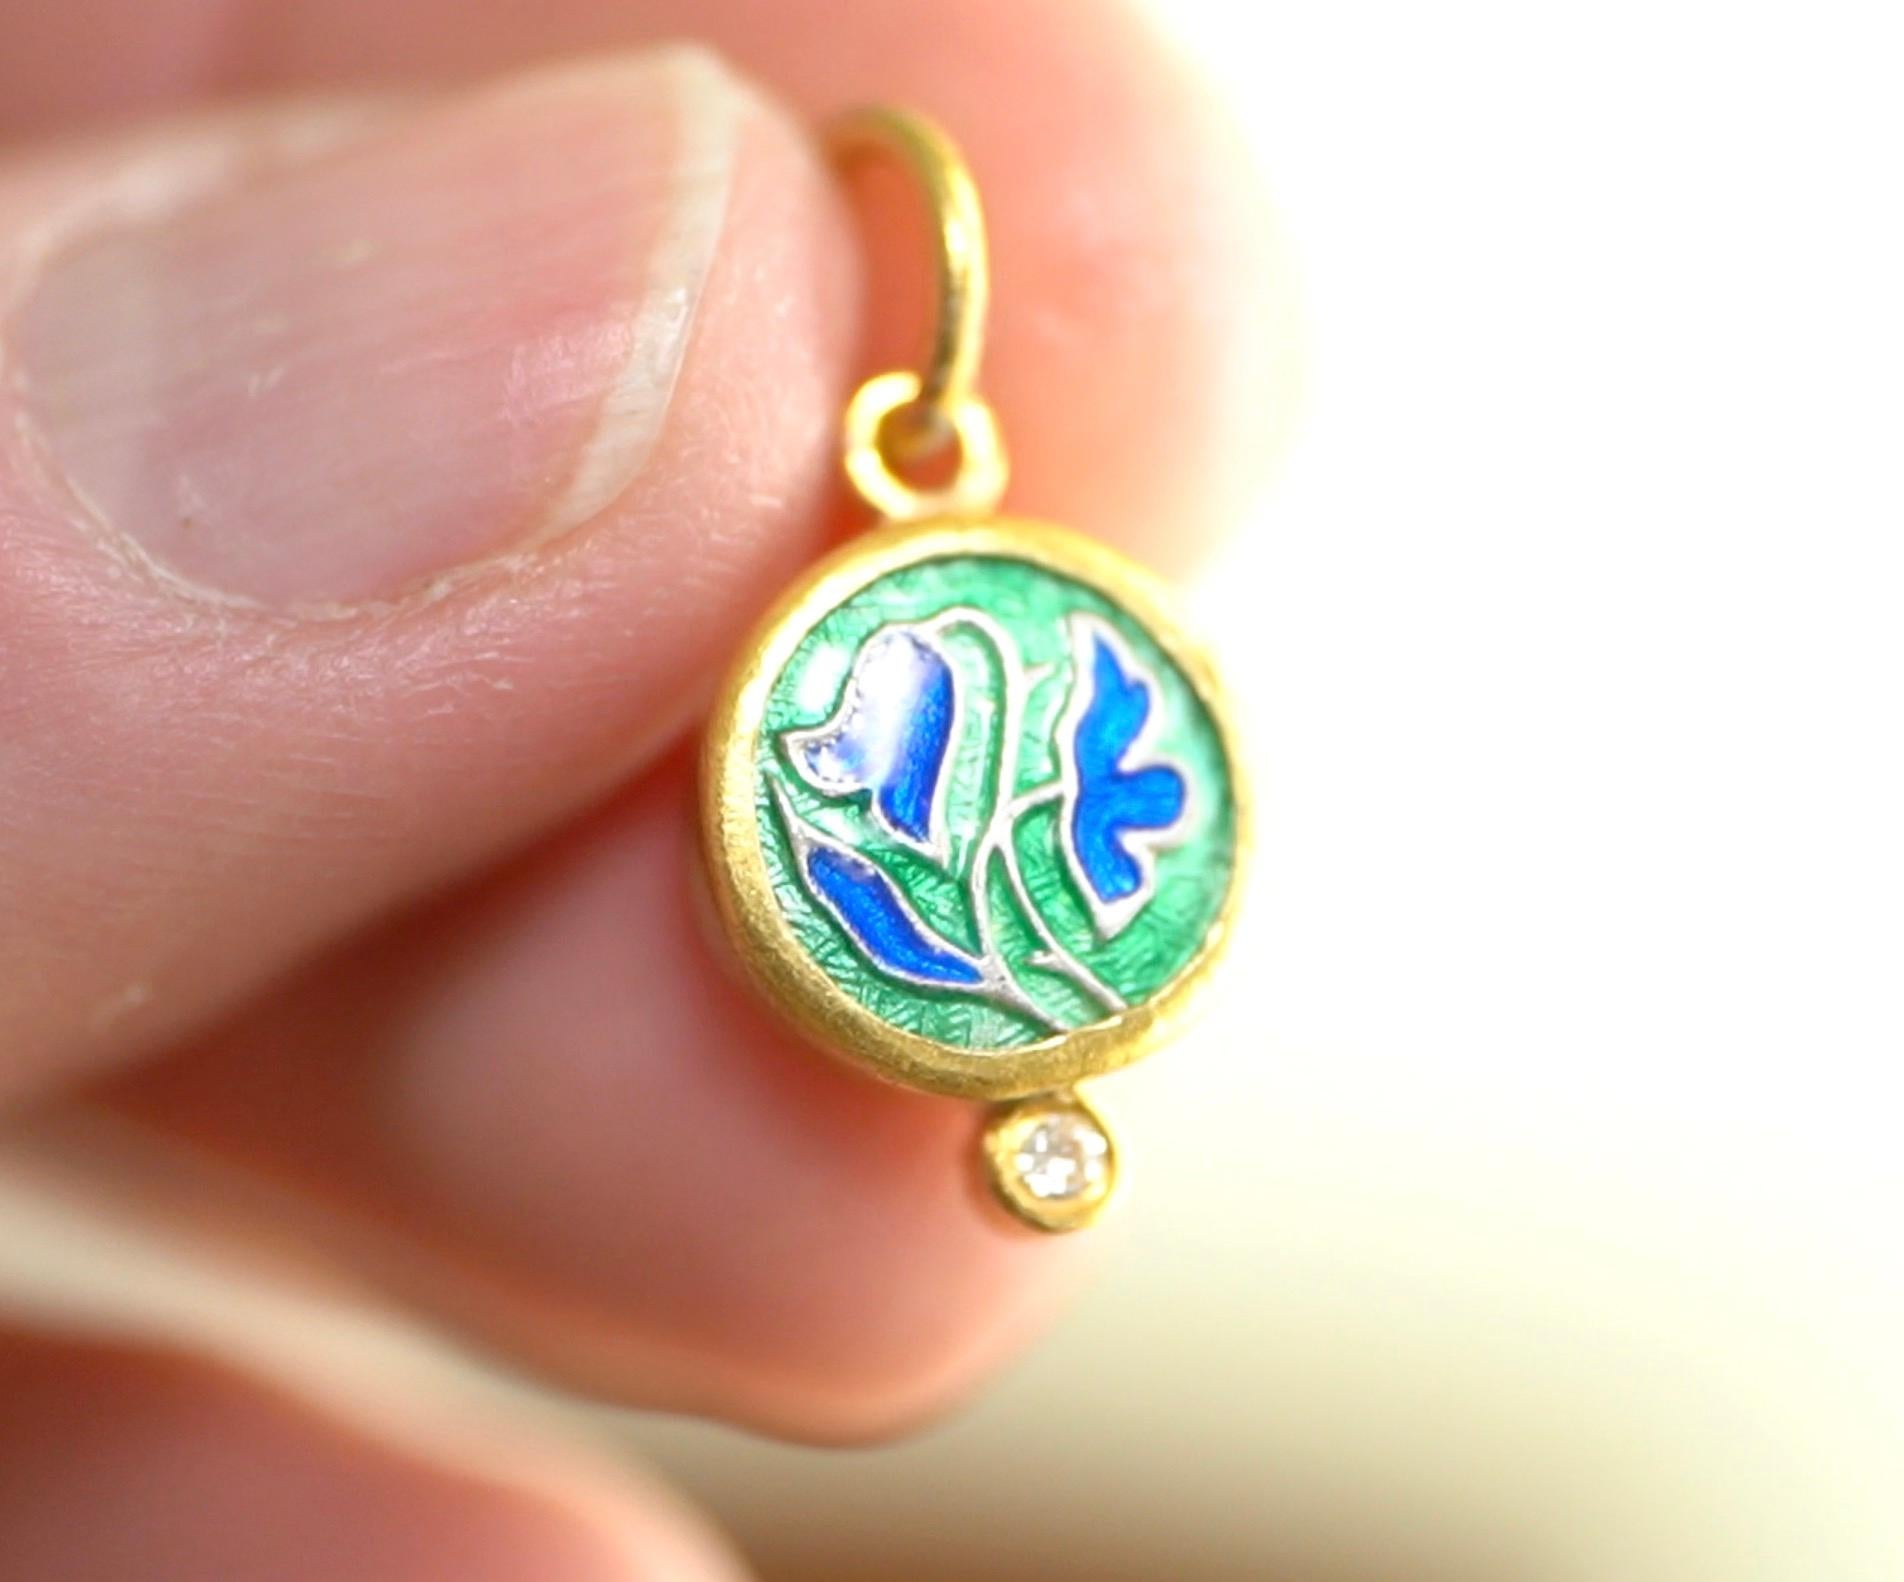 Contemporary Enamel Tulips Charm in Green & Blue, Amulet Pendant Necklace w/ Diamond 24k Gold